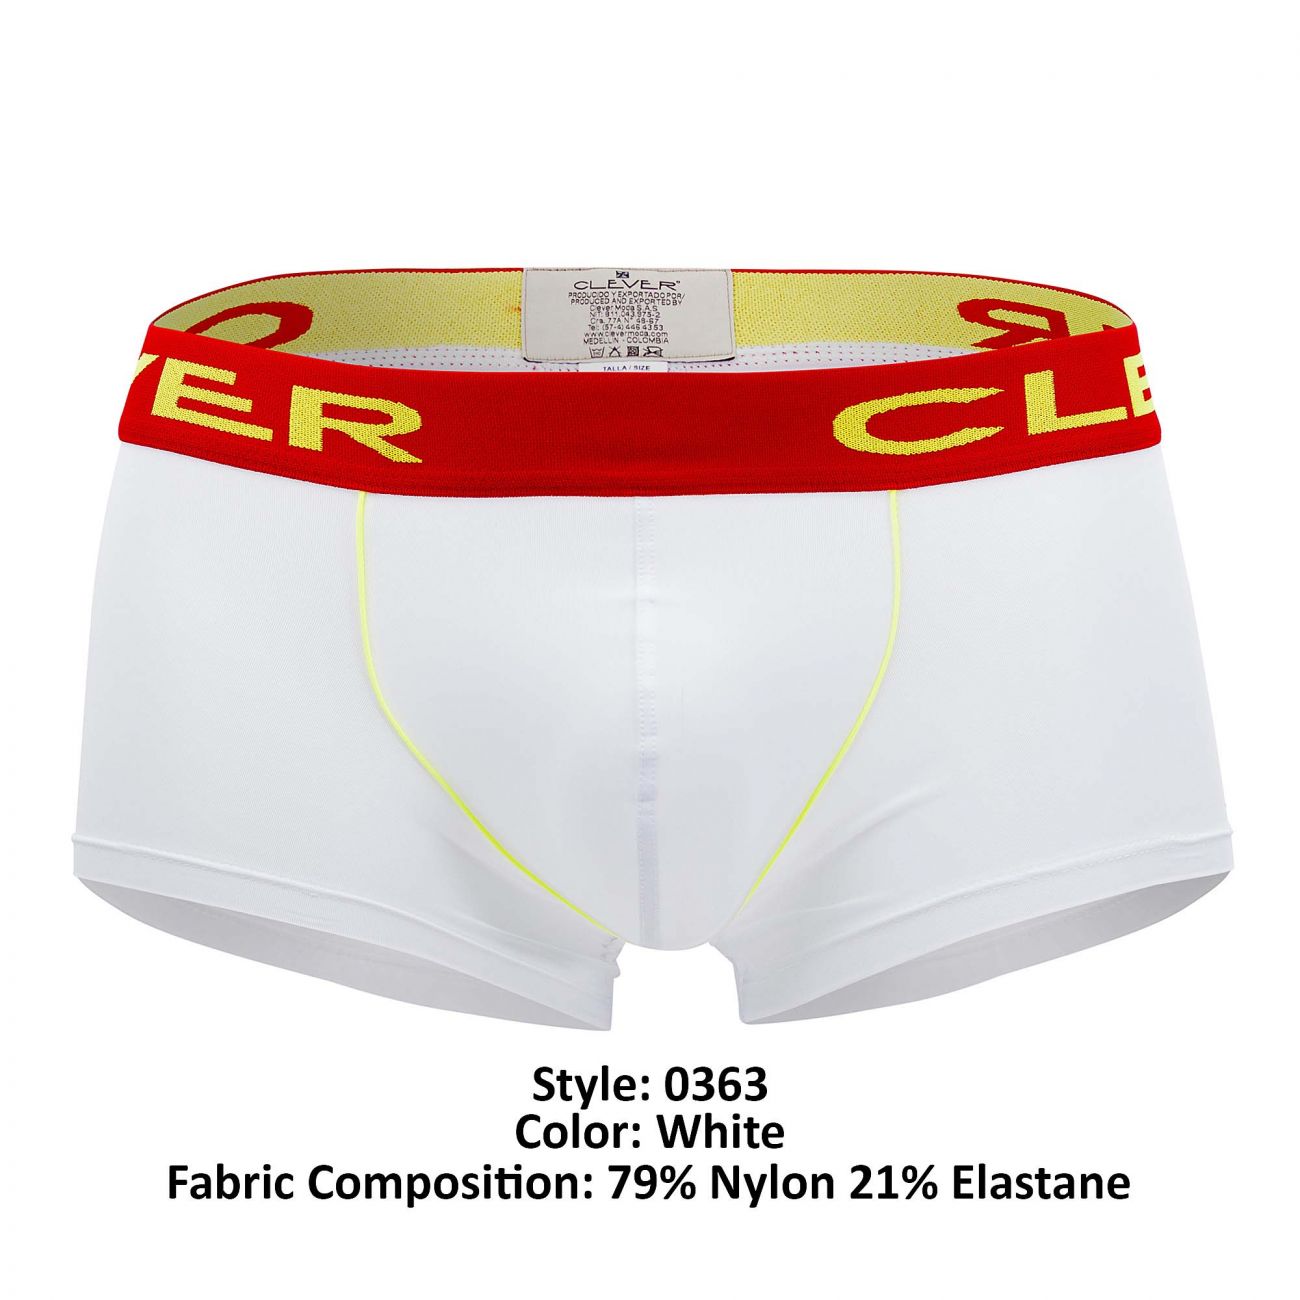 Clever 0363 Trend Trunks White